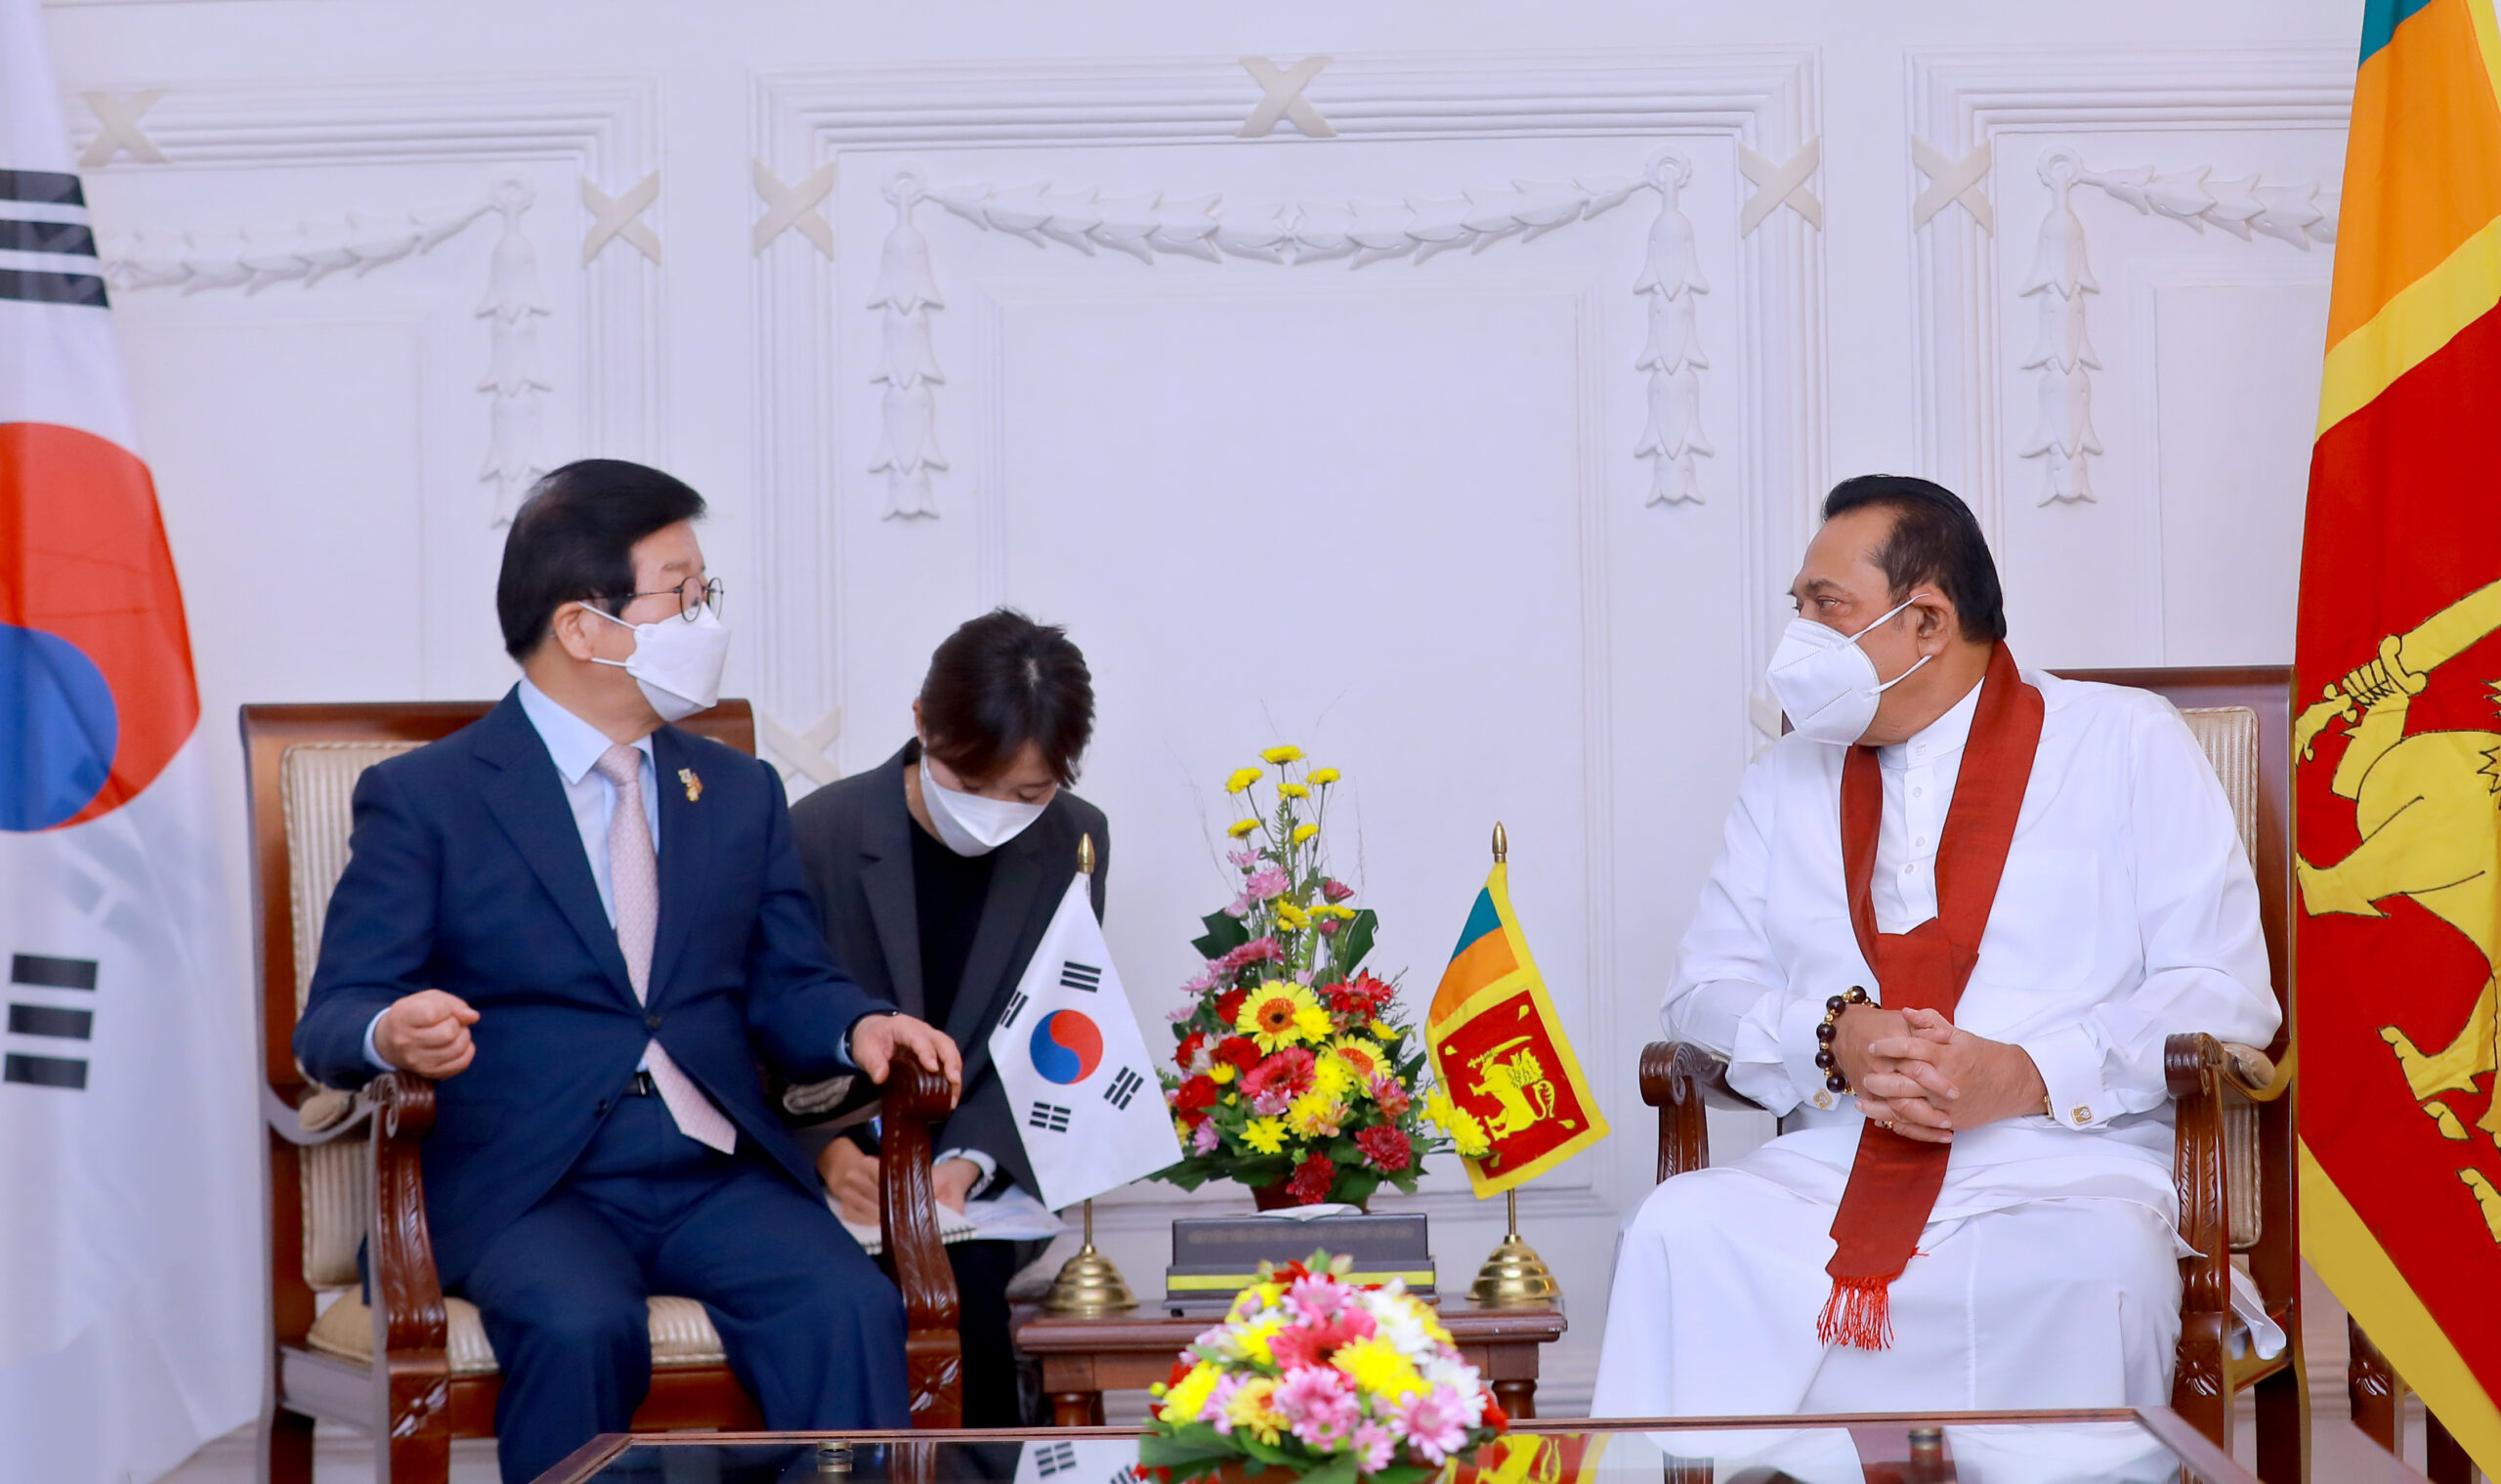 Prime Minister meets with the Speaker of the National Assembly of South Korea